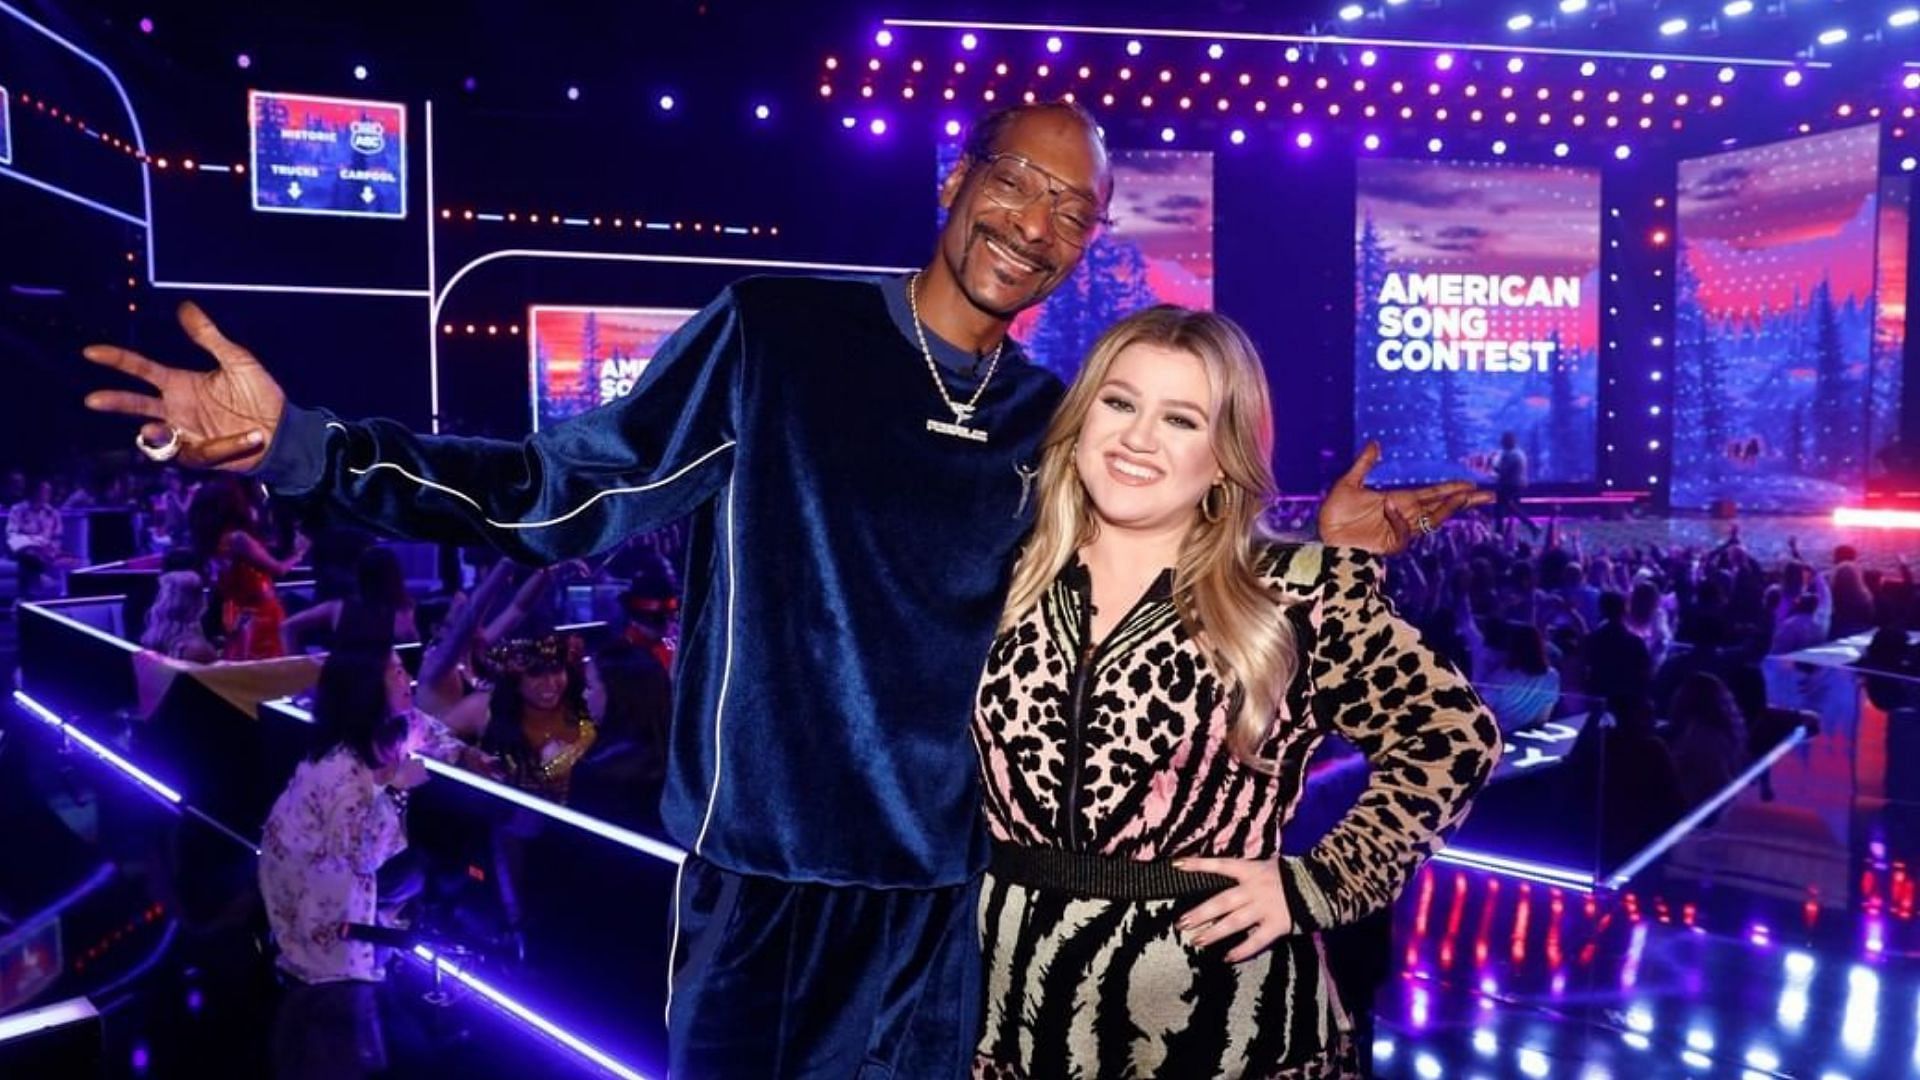 American Song Contest hosts Snoop Dogg and Kelly Clarkson (Image via kellyclarkson/Instagram)